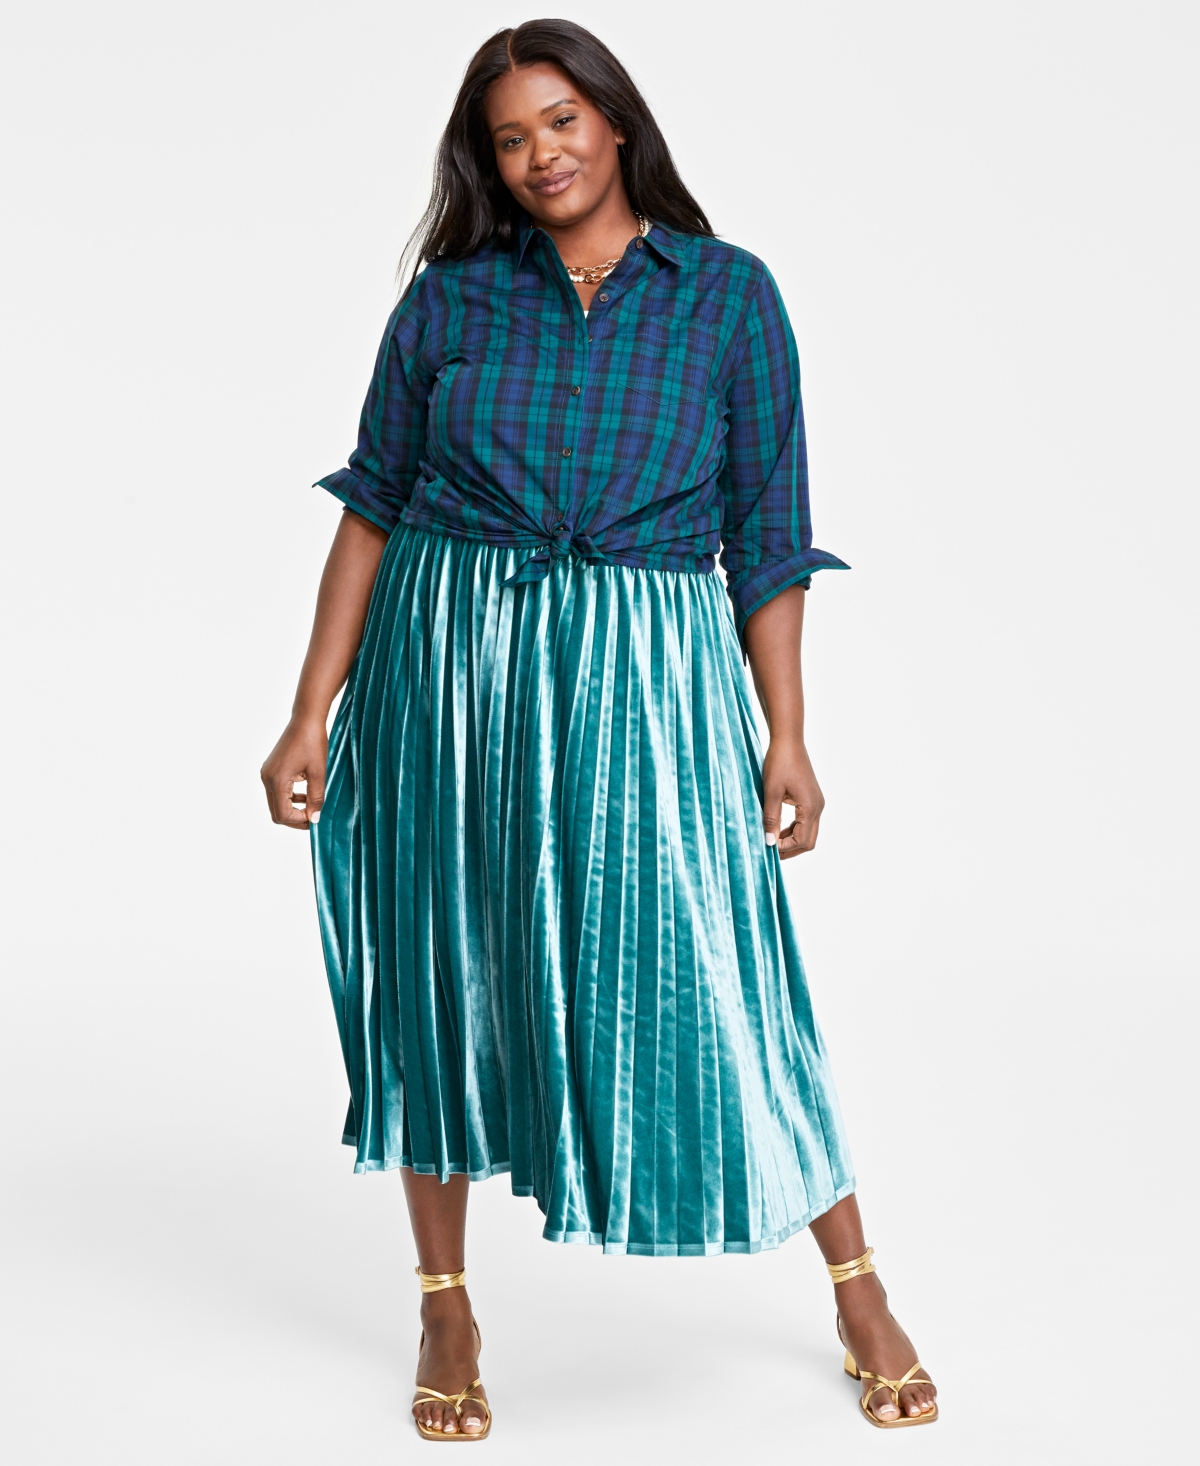 ON 34TH PLUS SIZE COTTON PLAID BUTTON-FRONT SHIRT, CREATED FOR MACY'S